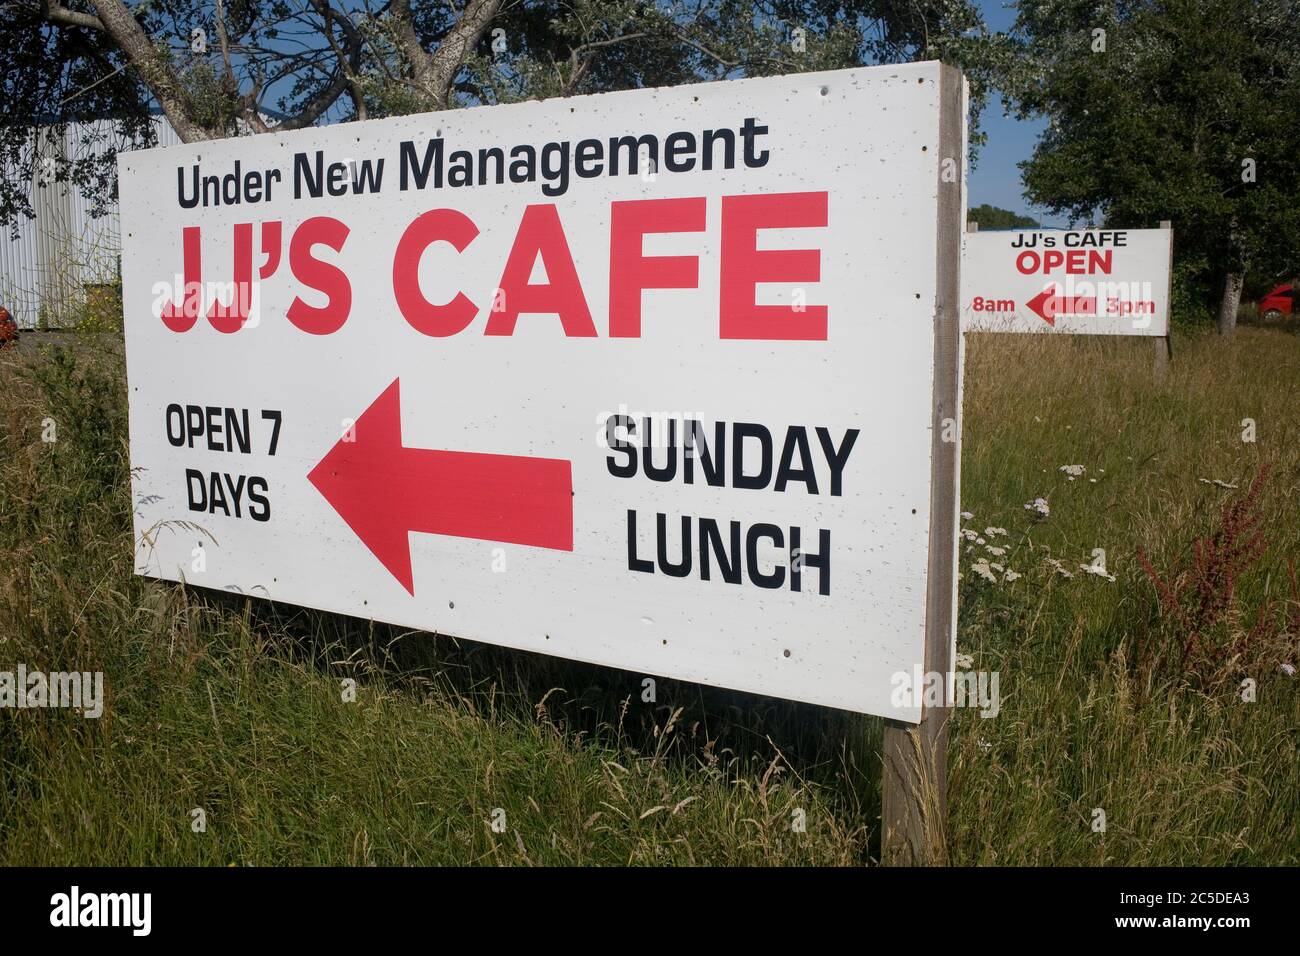 Signs to JJ's cafe, under new management, at Kenfig industrial estate with opening hours Stock Photo